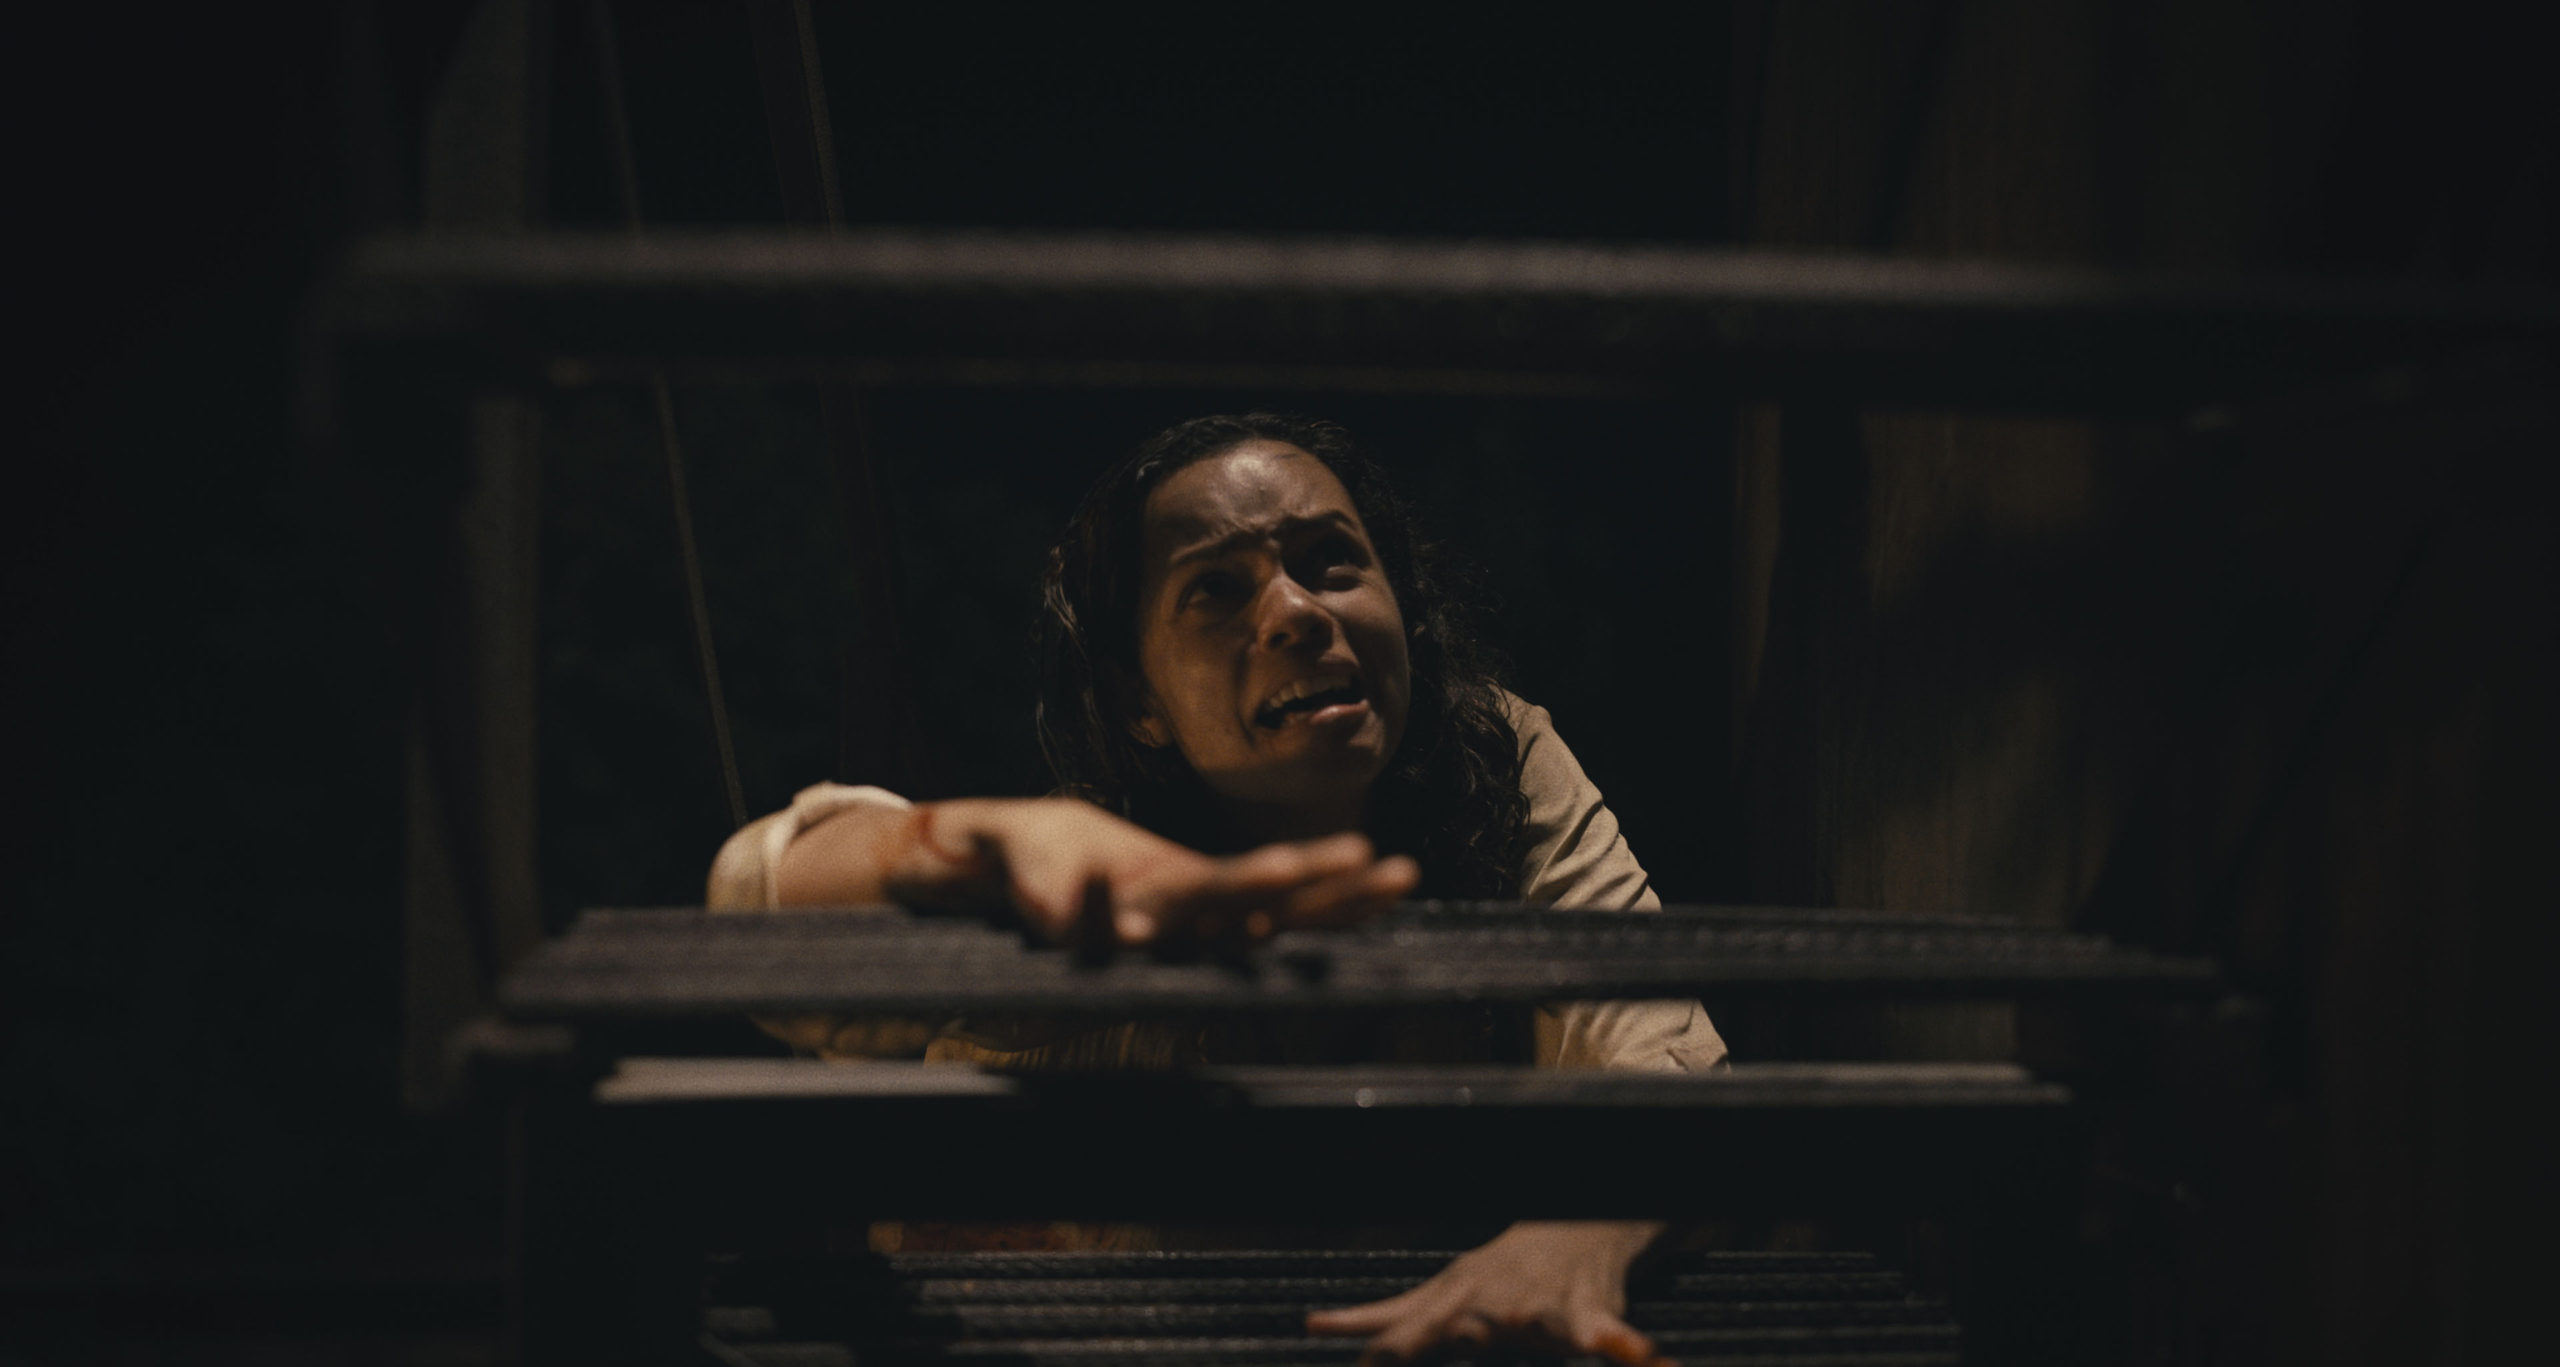 Barbarian Review - One of 2022's Biggest Horror Movie Surprises